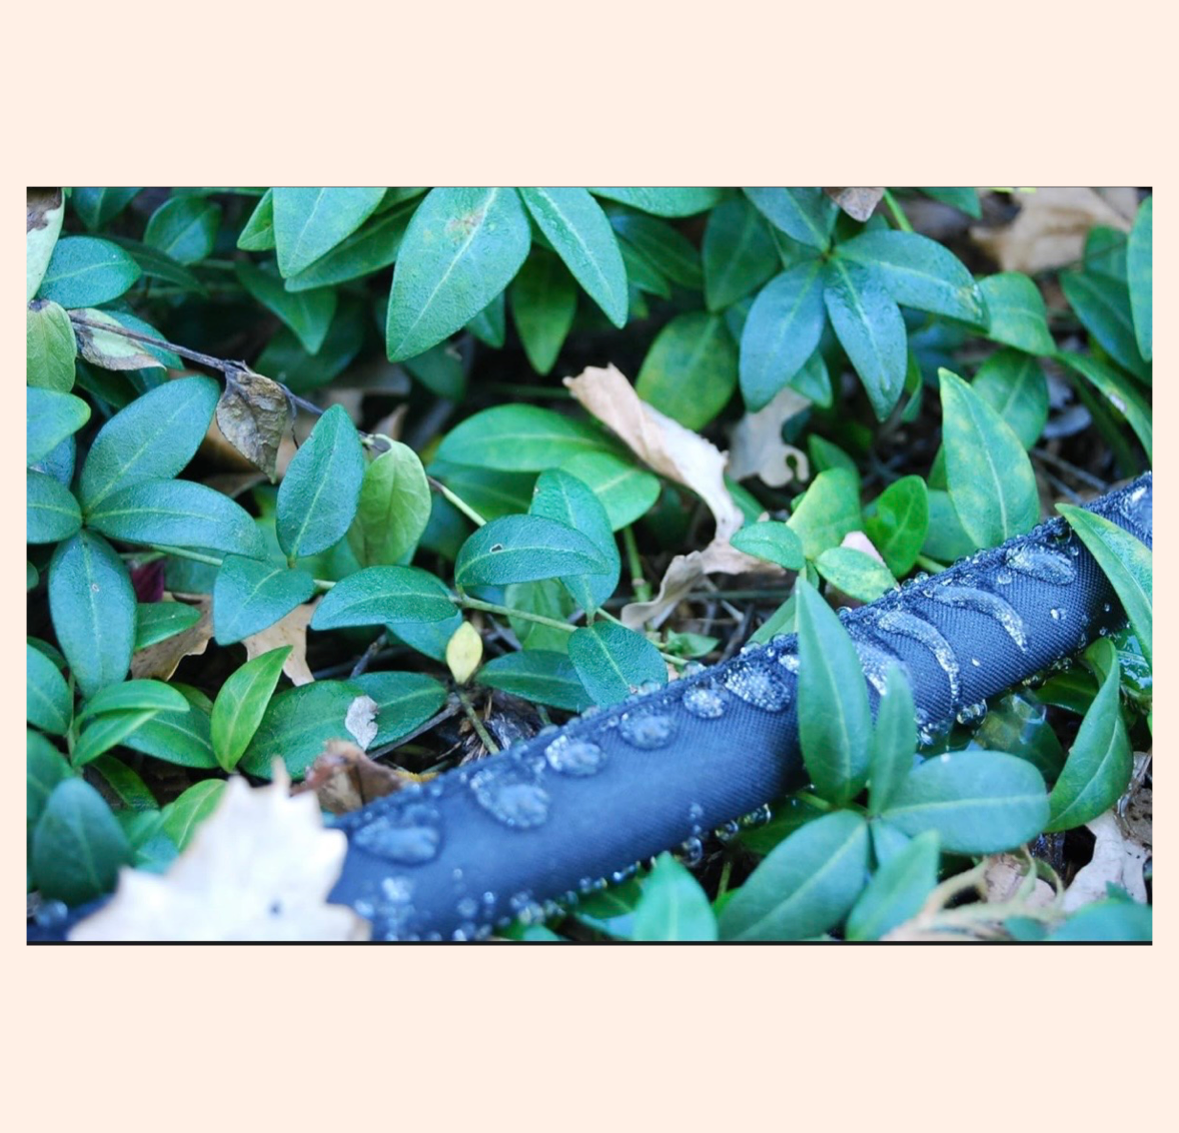 75ft Flat Soaker Hose - Reduces Water Consumption By 60%